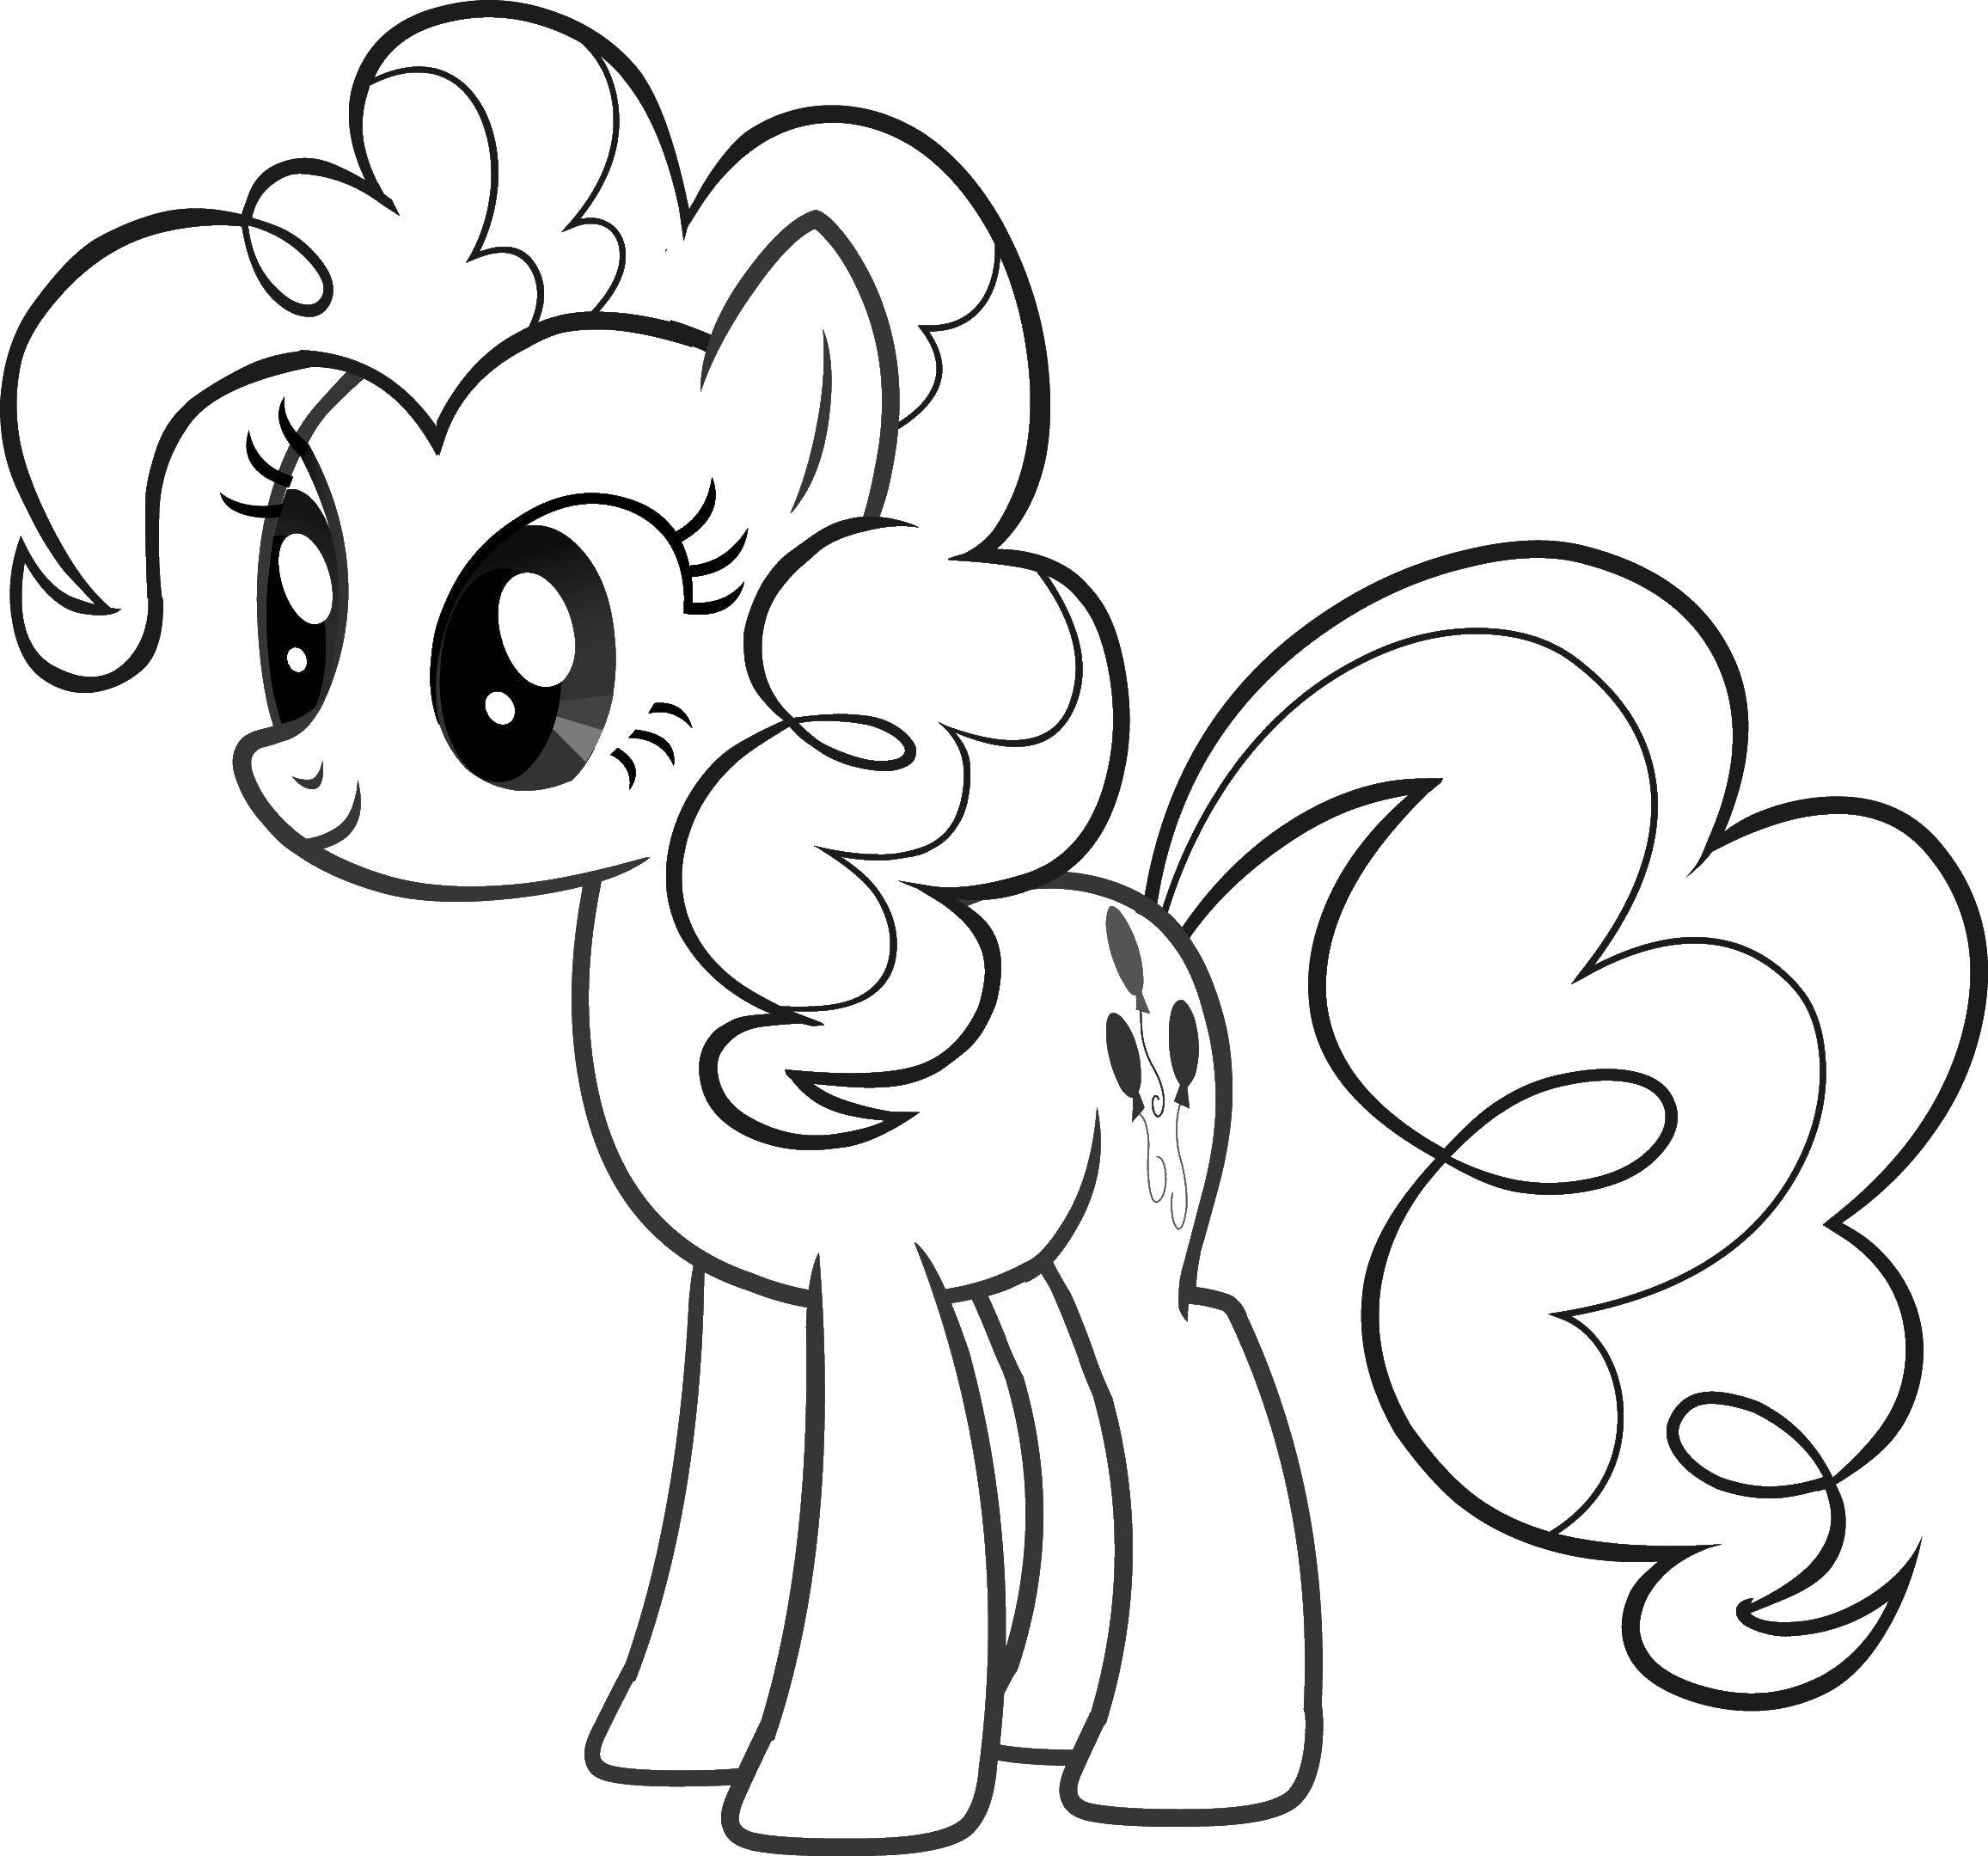 Coloring Ponies from my little pony . Category Cartoon character. Tags:  Cartoon character, My little pony .